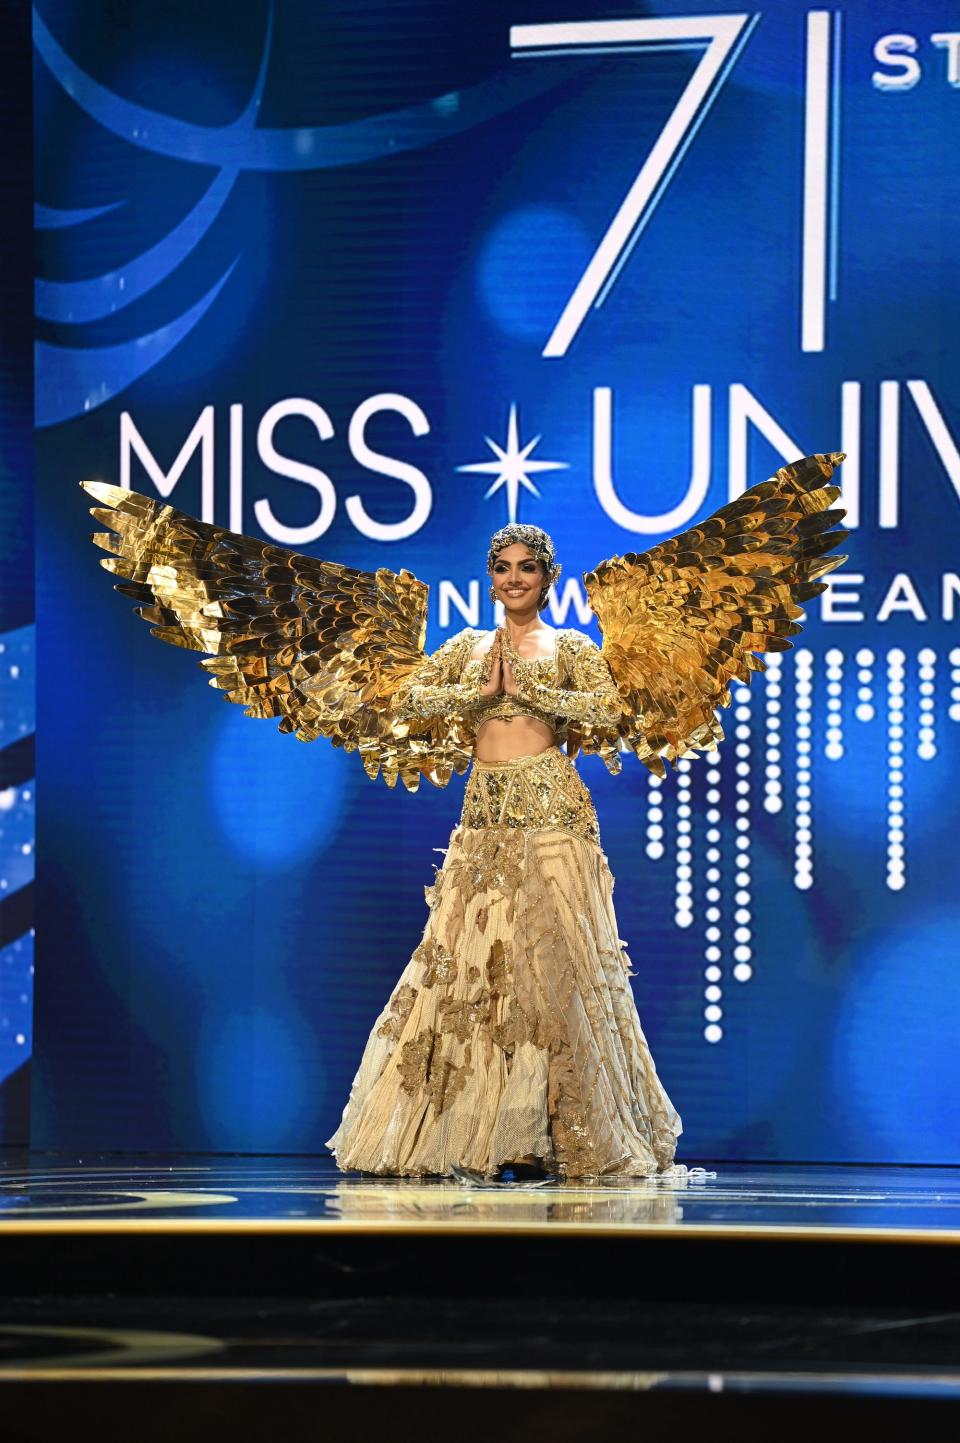 Miss India in the 2023 Miss Universe Costume Contest.